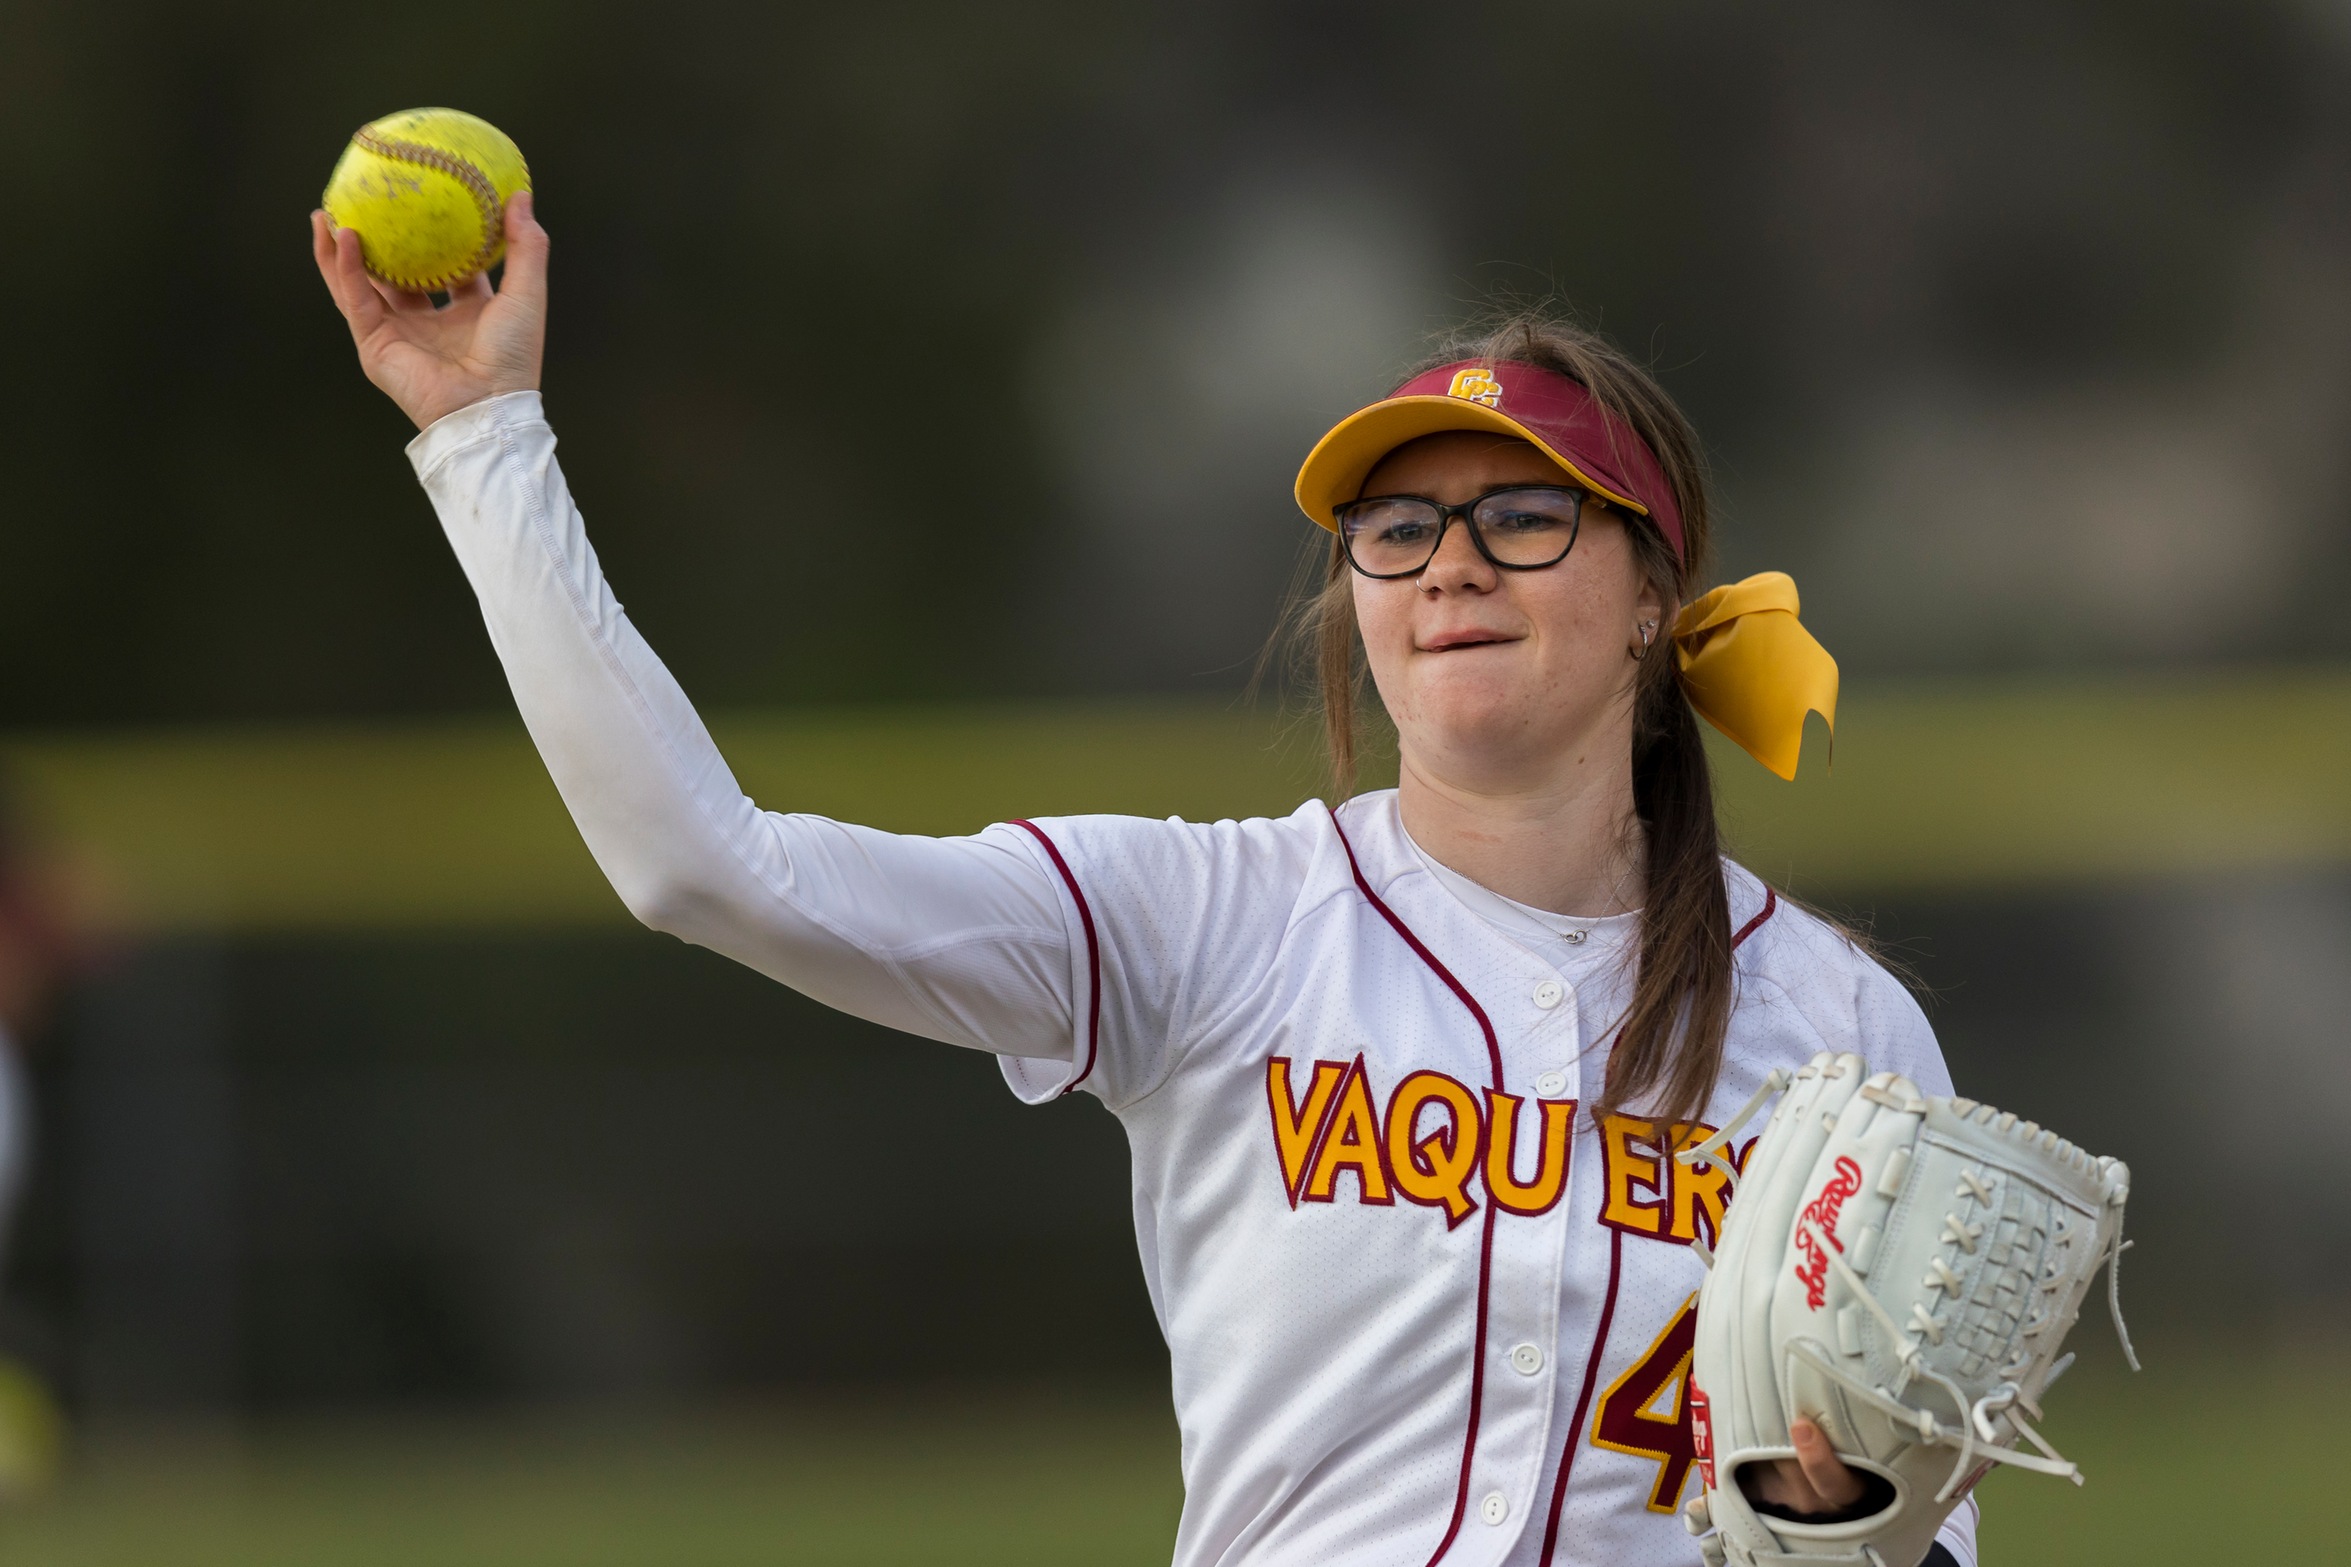 GCC Women's Softball wins epic game against L.A. Harbor College, 17-15 in 8 innings April 2